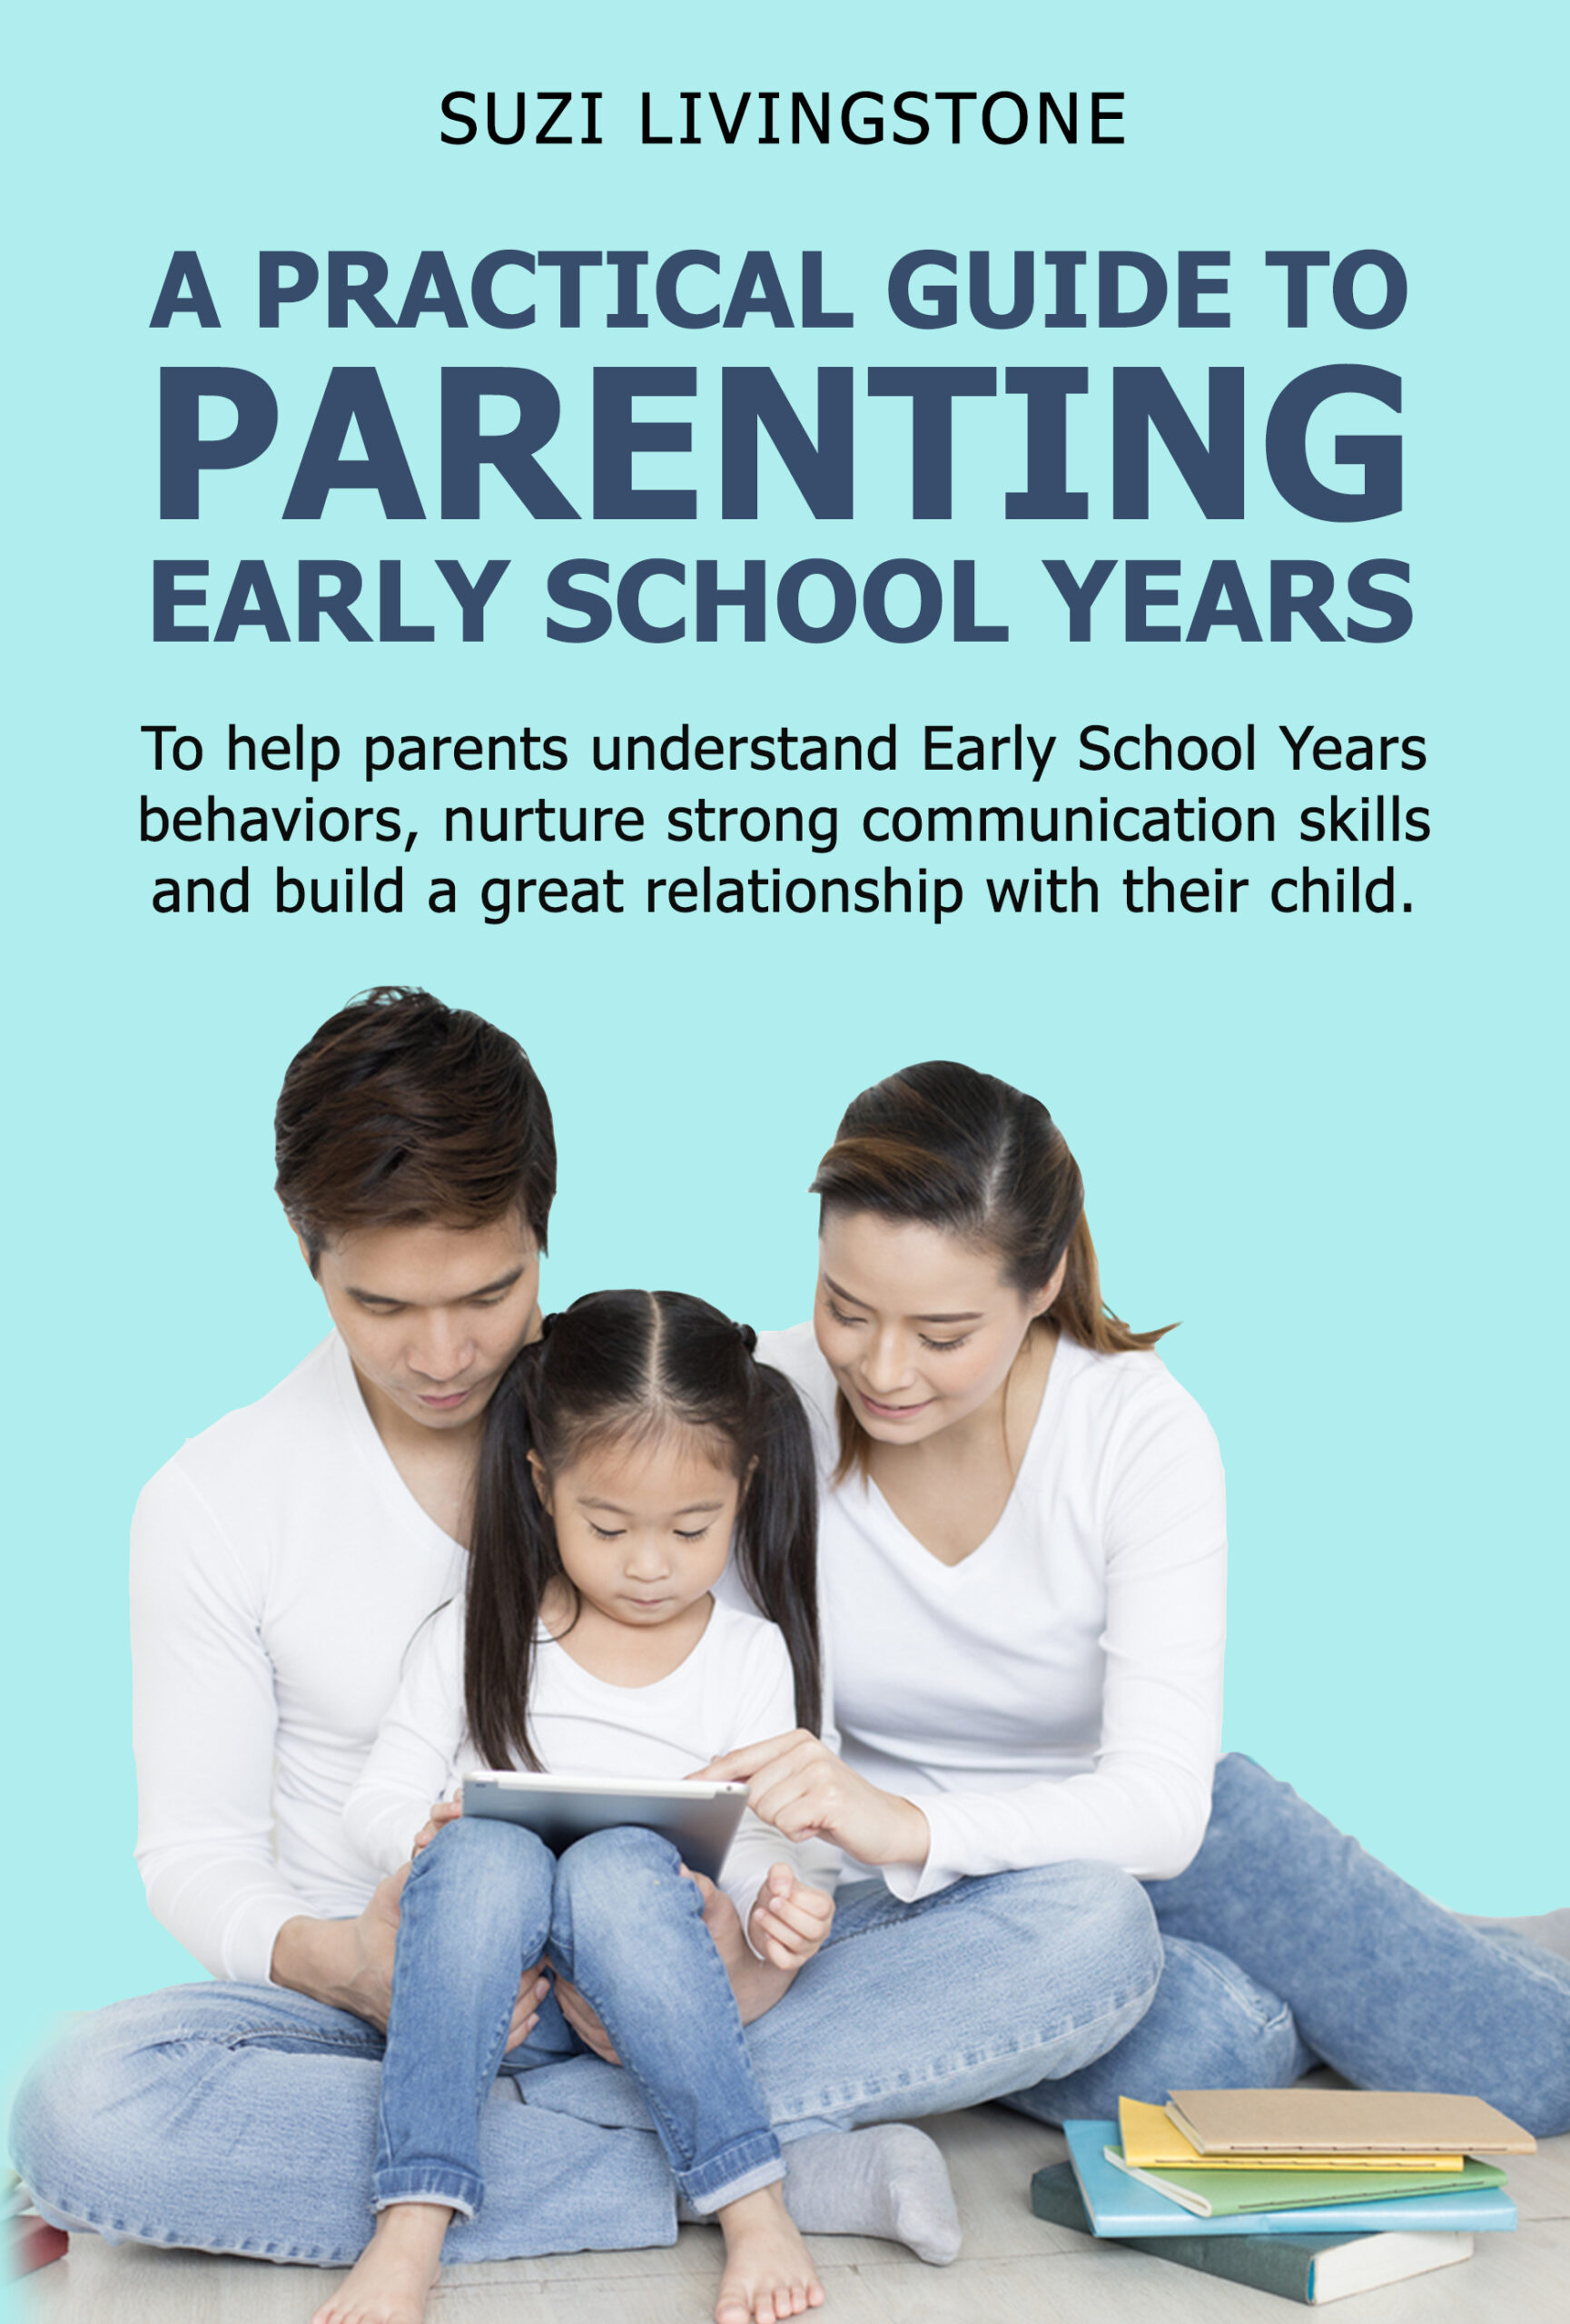 FREE: A Practical Guide to Parenting Early School Years-To help parents understand Early School Years behaviors, nurture strong communication skills and build a great relationship with their child. by Suzi Livingstone